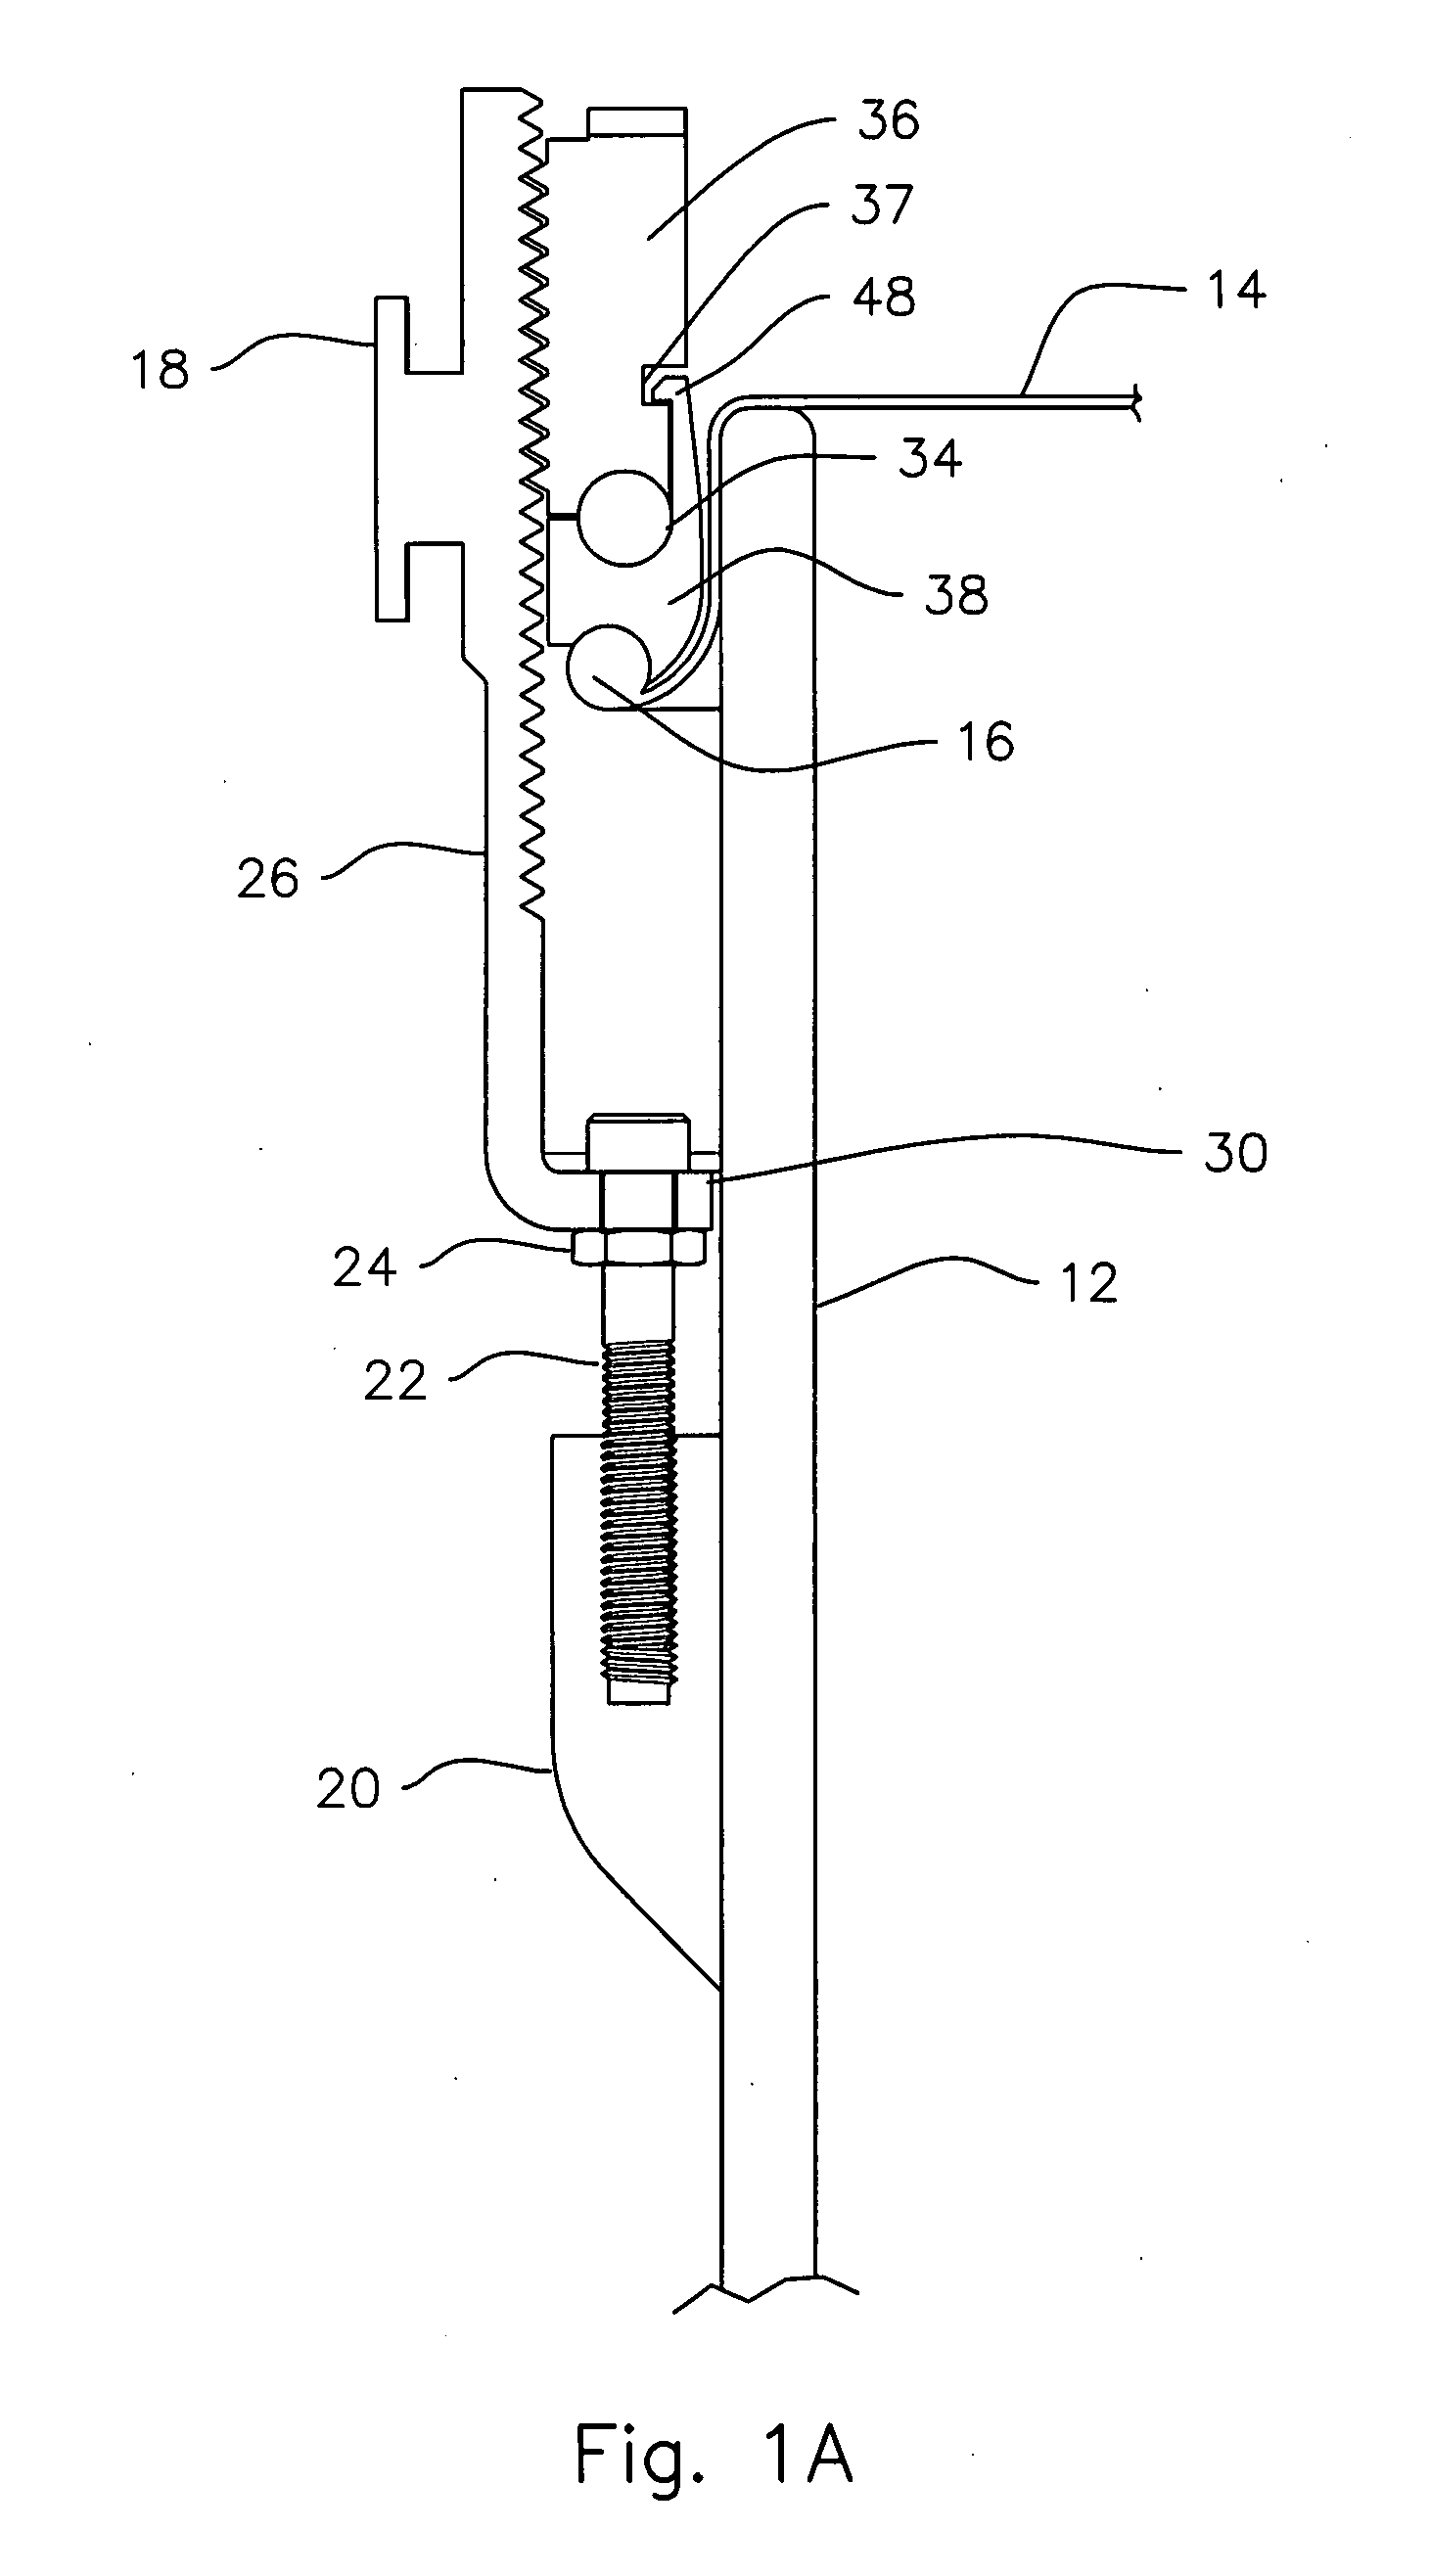 Method and apparatus for tuning a musical drum